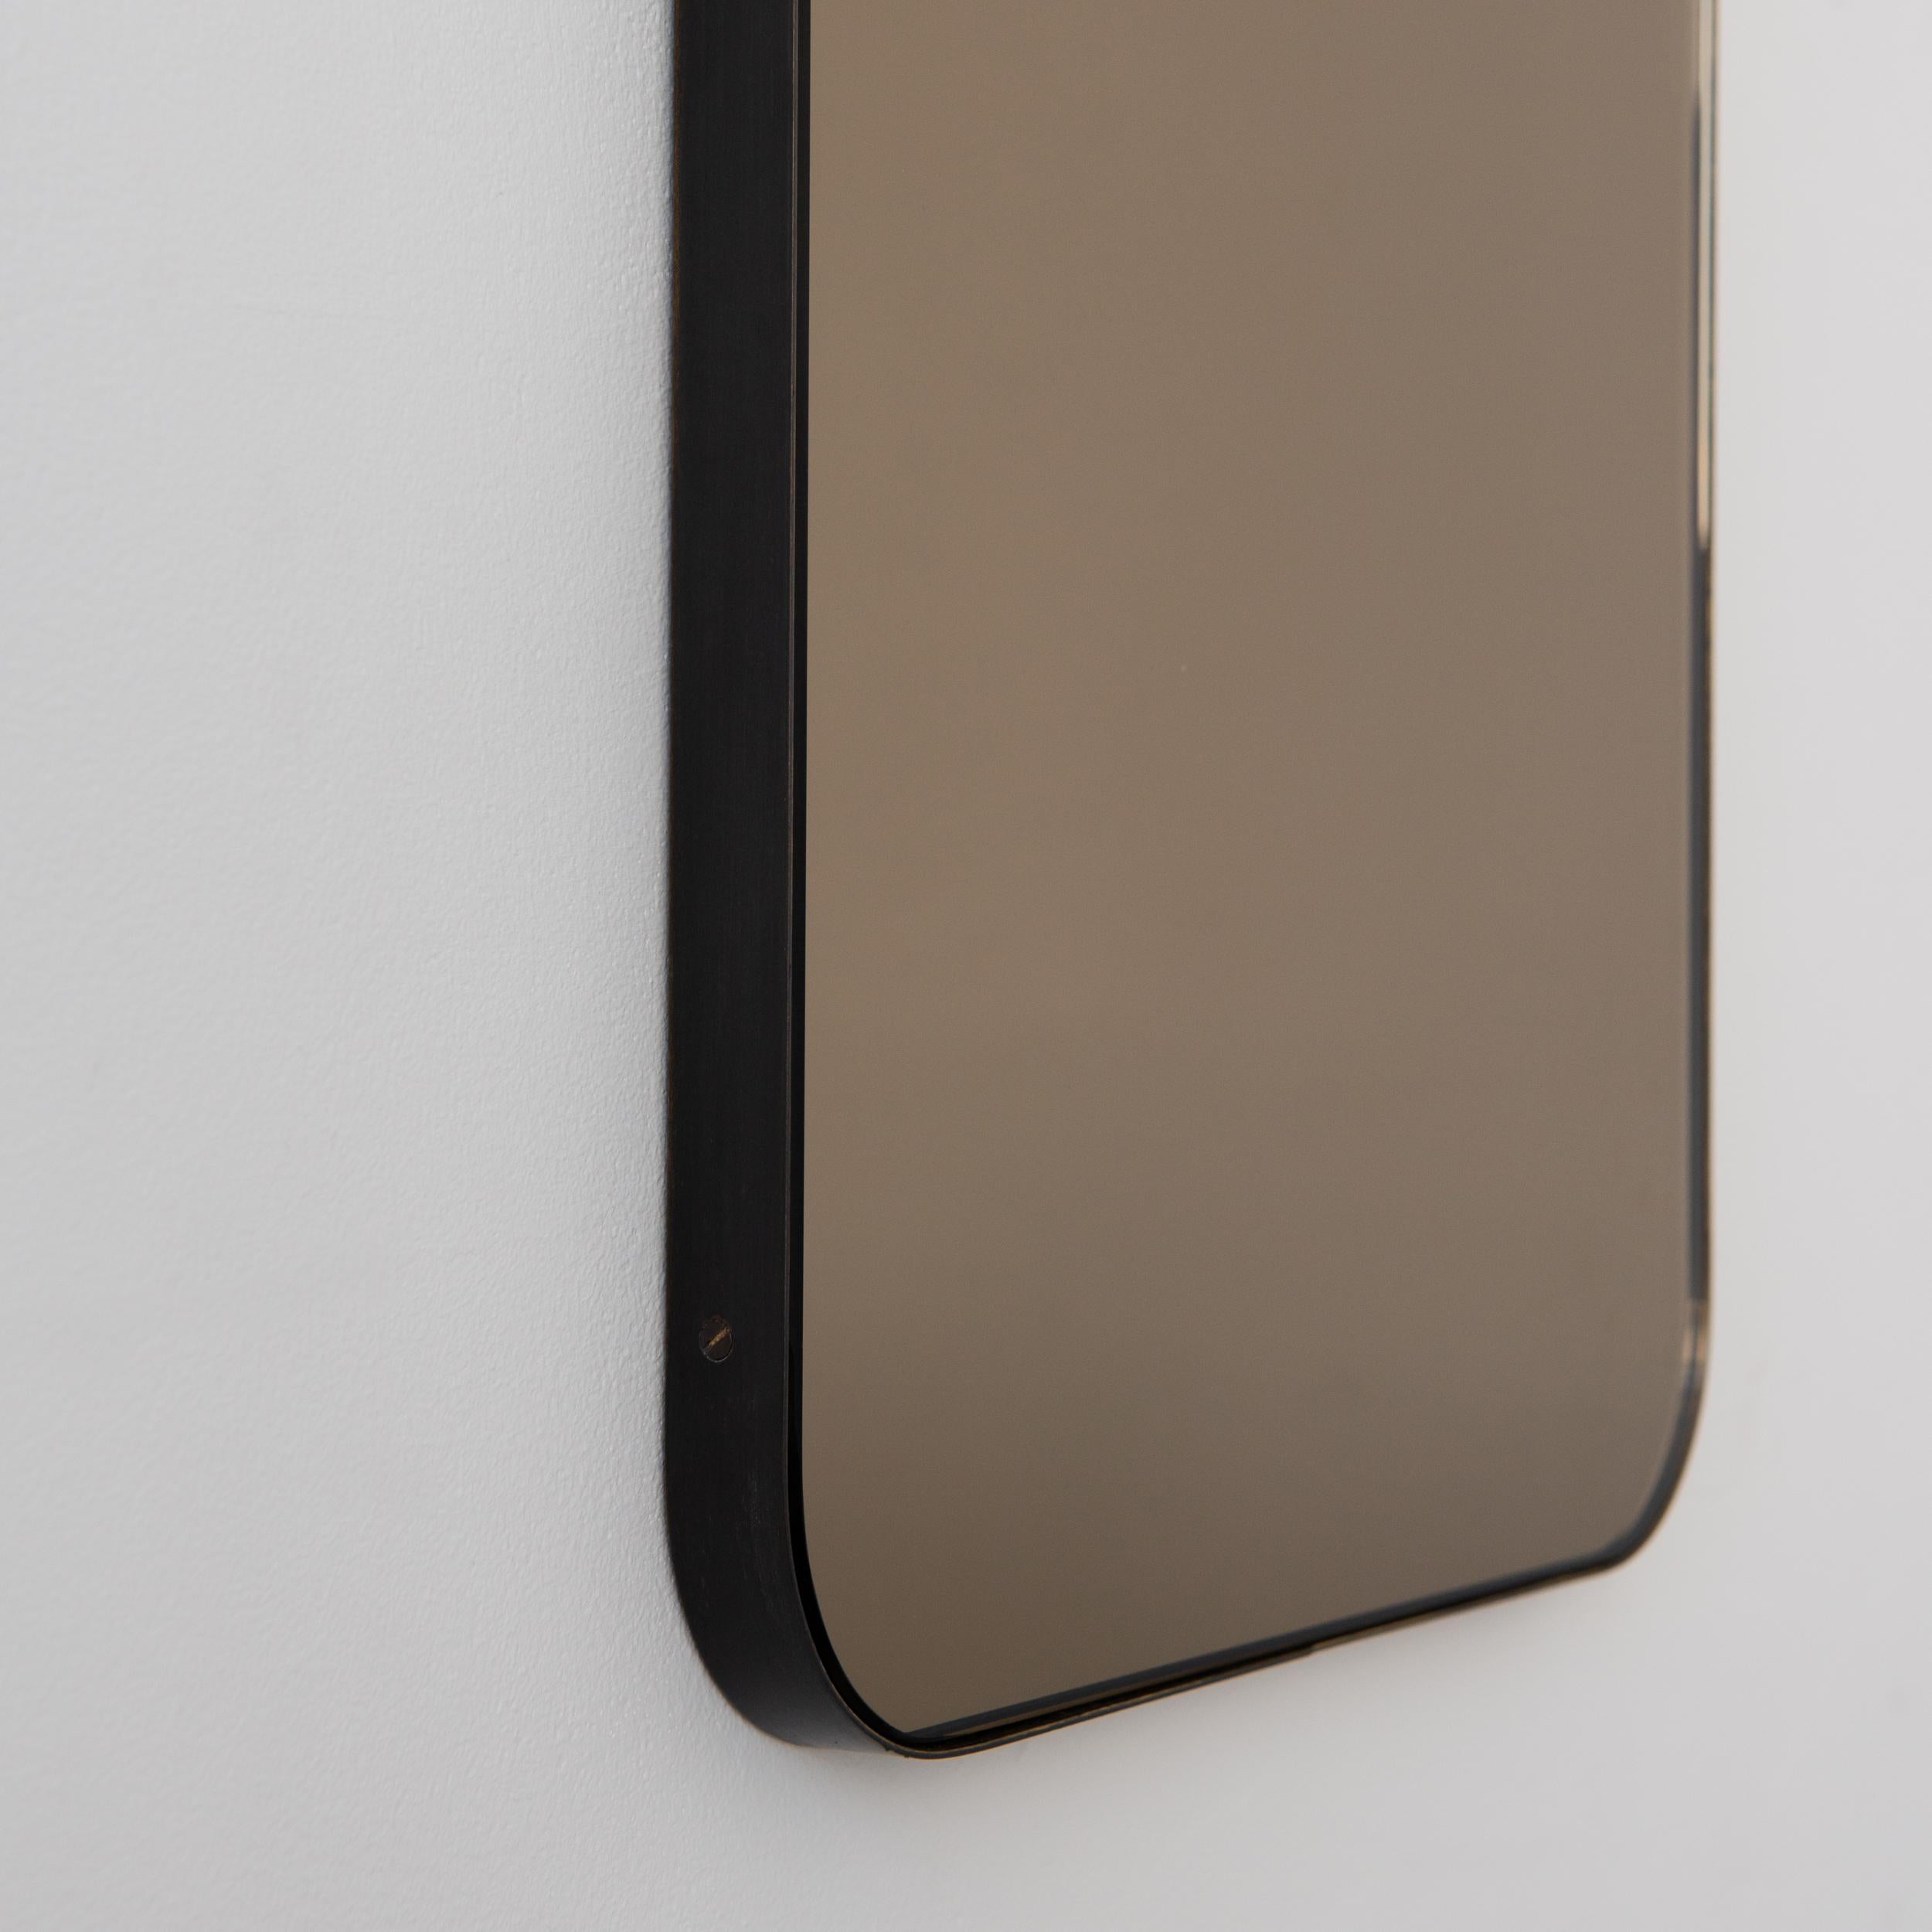 Modern rectangular mirror with an elegant solid bronze patina brass frame. Part of the charming Quadris™ collection, designed and made in London, UK. 

Our mirrors are designed with an integrated French cleat (split batten) system that ensures the